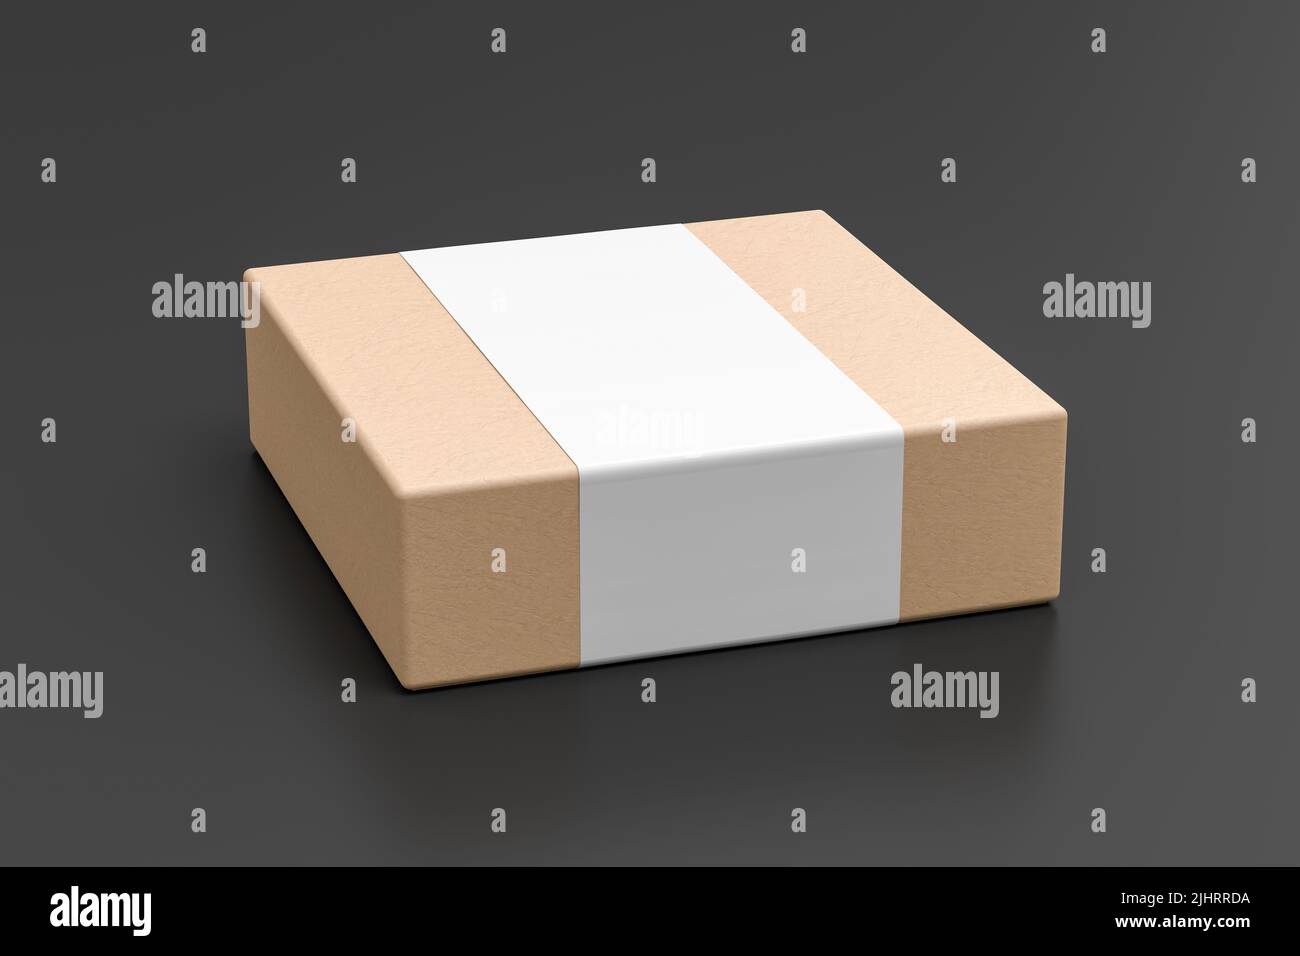 Square box mock up with blank paper cover label: Cardboard gift box on black background. Side view. 3d illustration Stock Photo